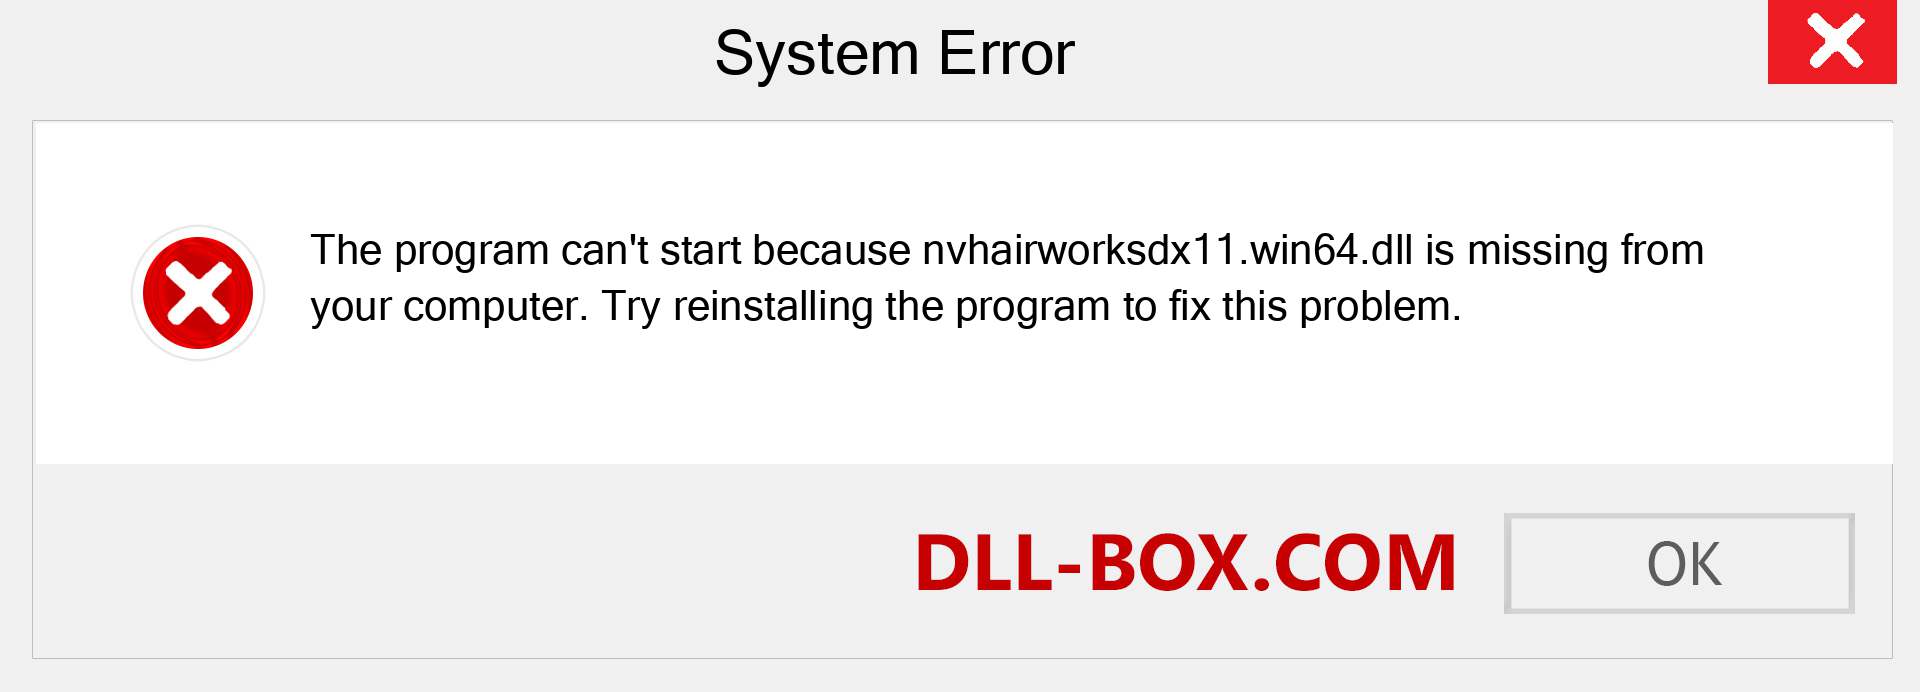  nvhairworksdx11.win64.dll file is missing?. Download for Windows 7, 8, 10 - Fix  nvhairworksdx11.win64 dll Missing Error on Windows, photos, images